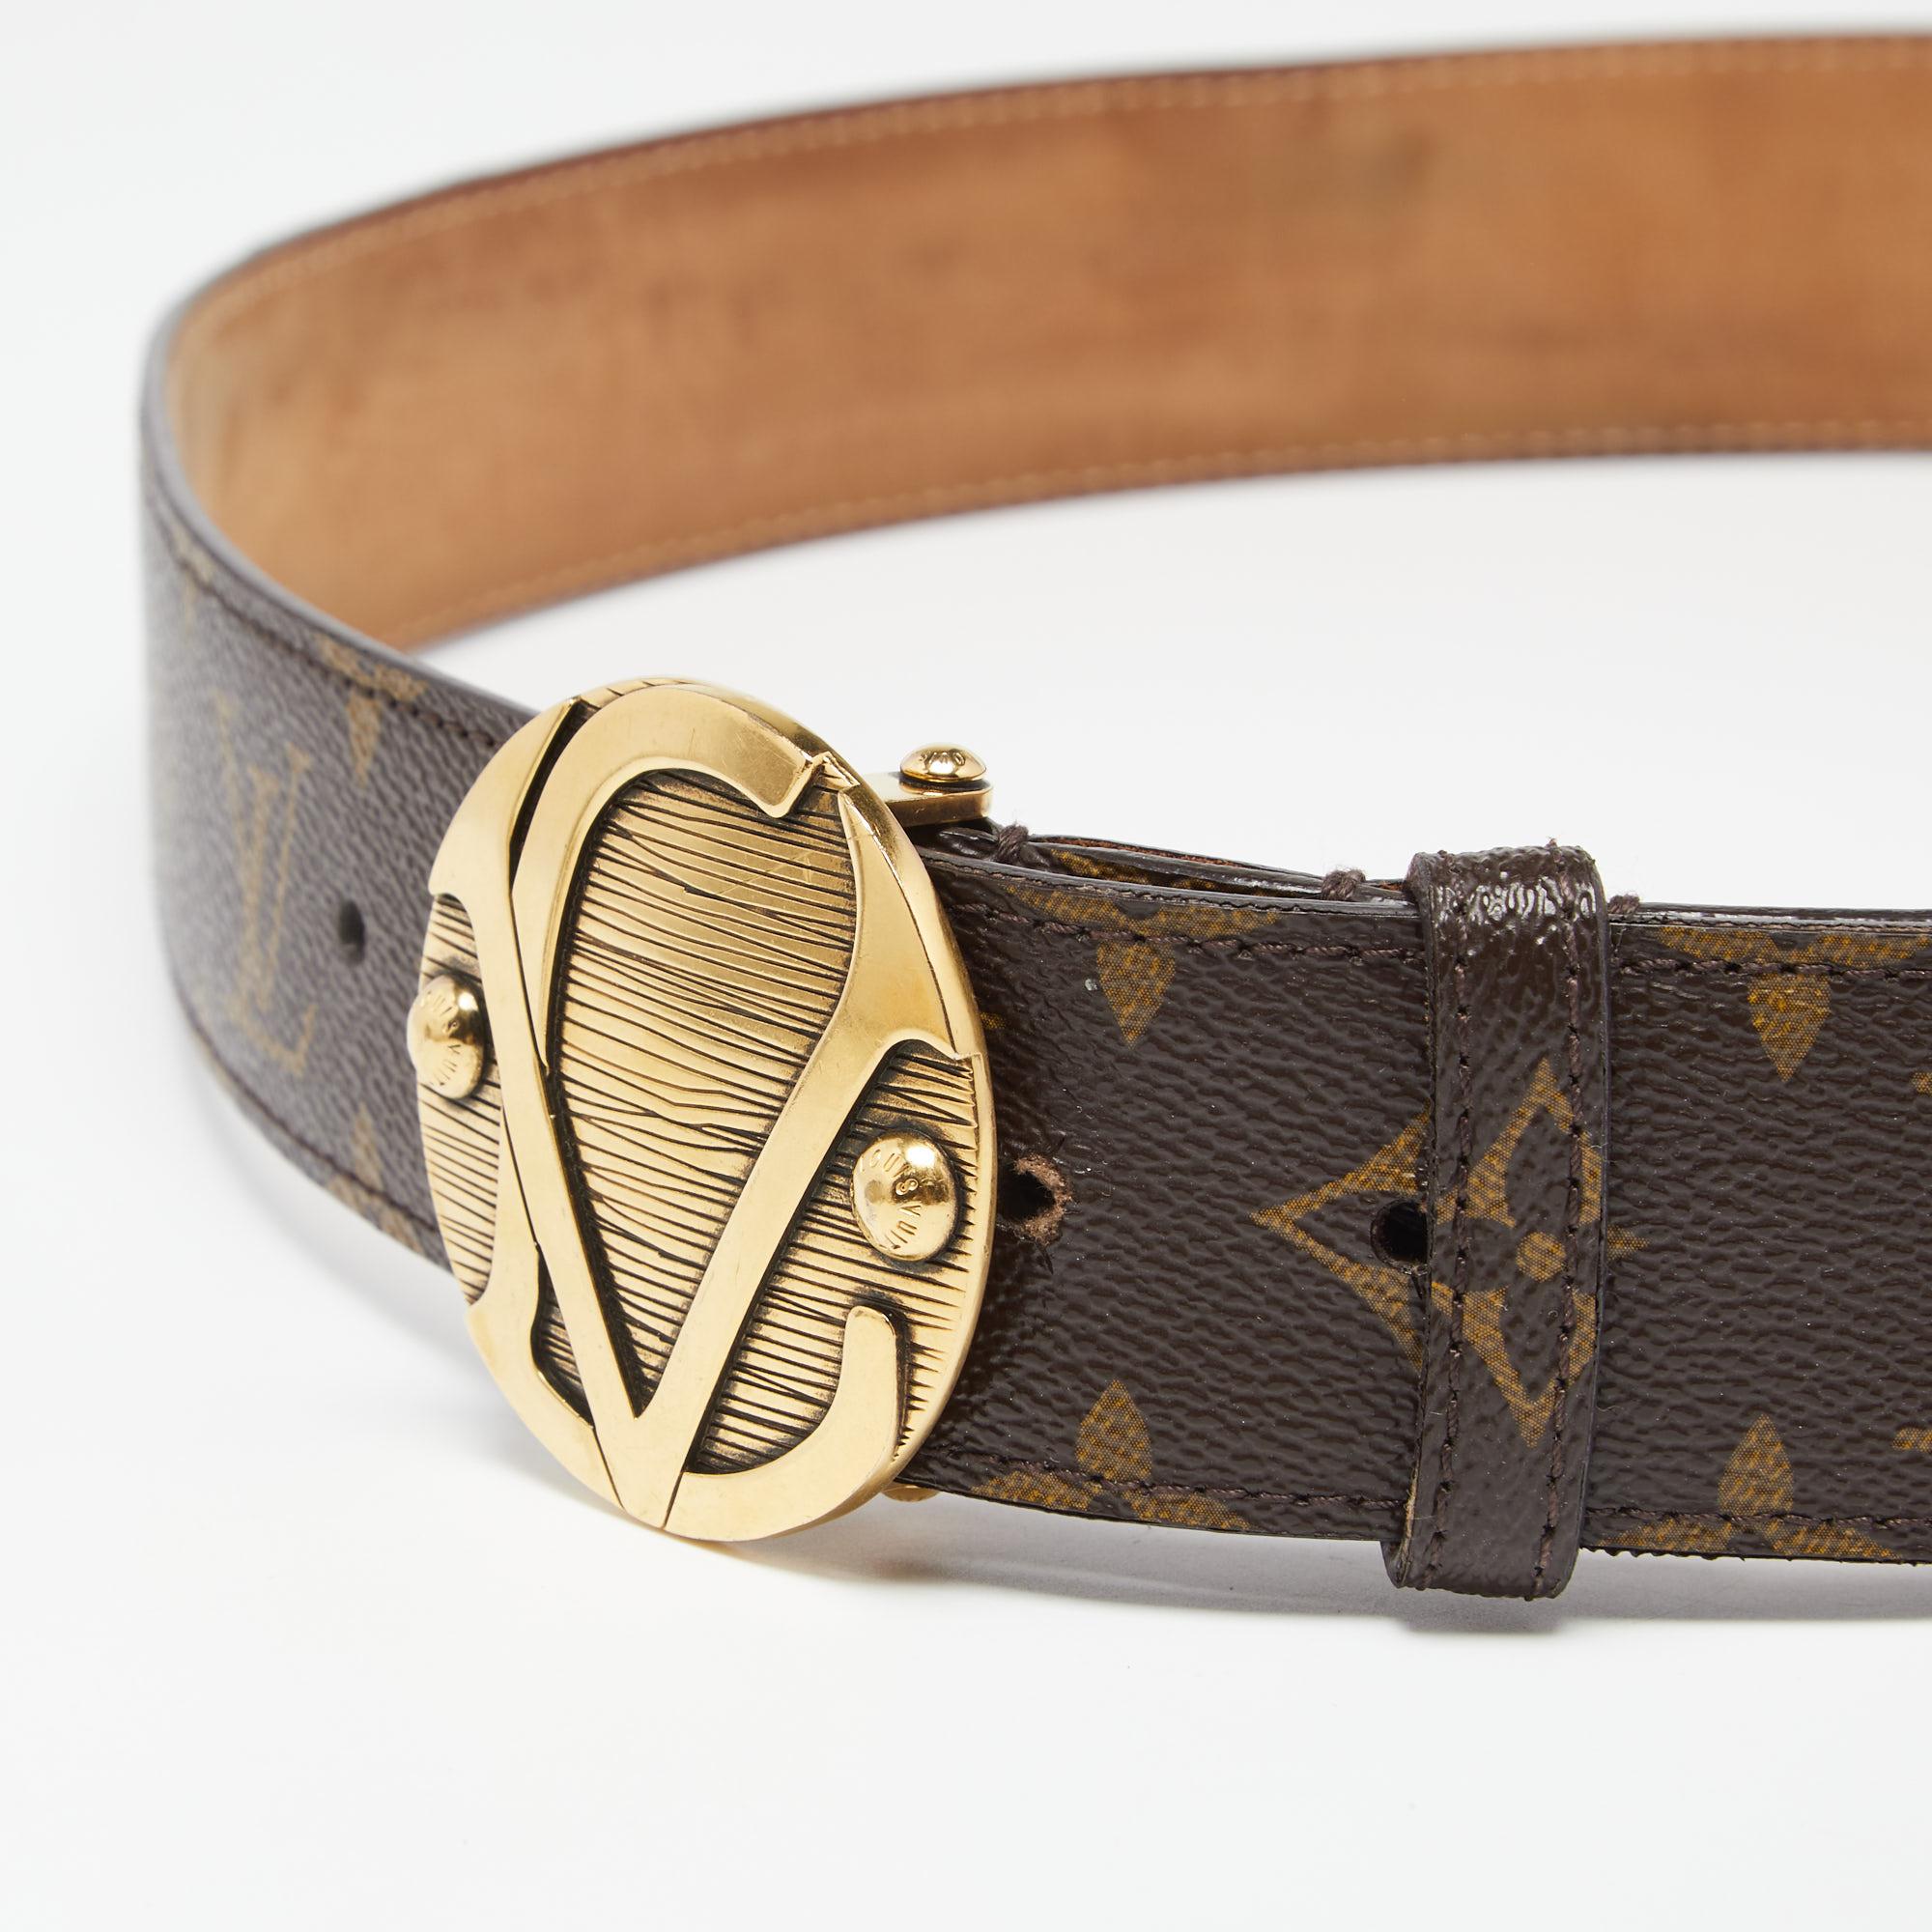 Add a luxe twist to your attire with this belt from Louis Vuitton. Made from monogram canvas, this belt comes with a complementing gold-tone 'LV' logo plaque and a single loop. It is durable and stylish.

Includes: Original Dustbag